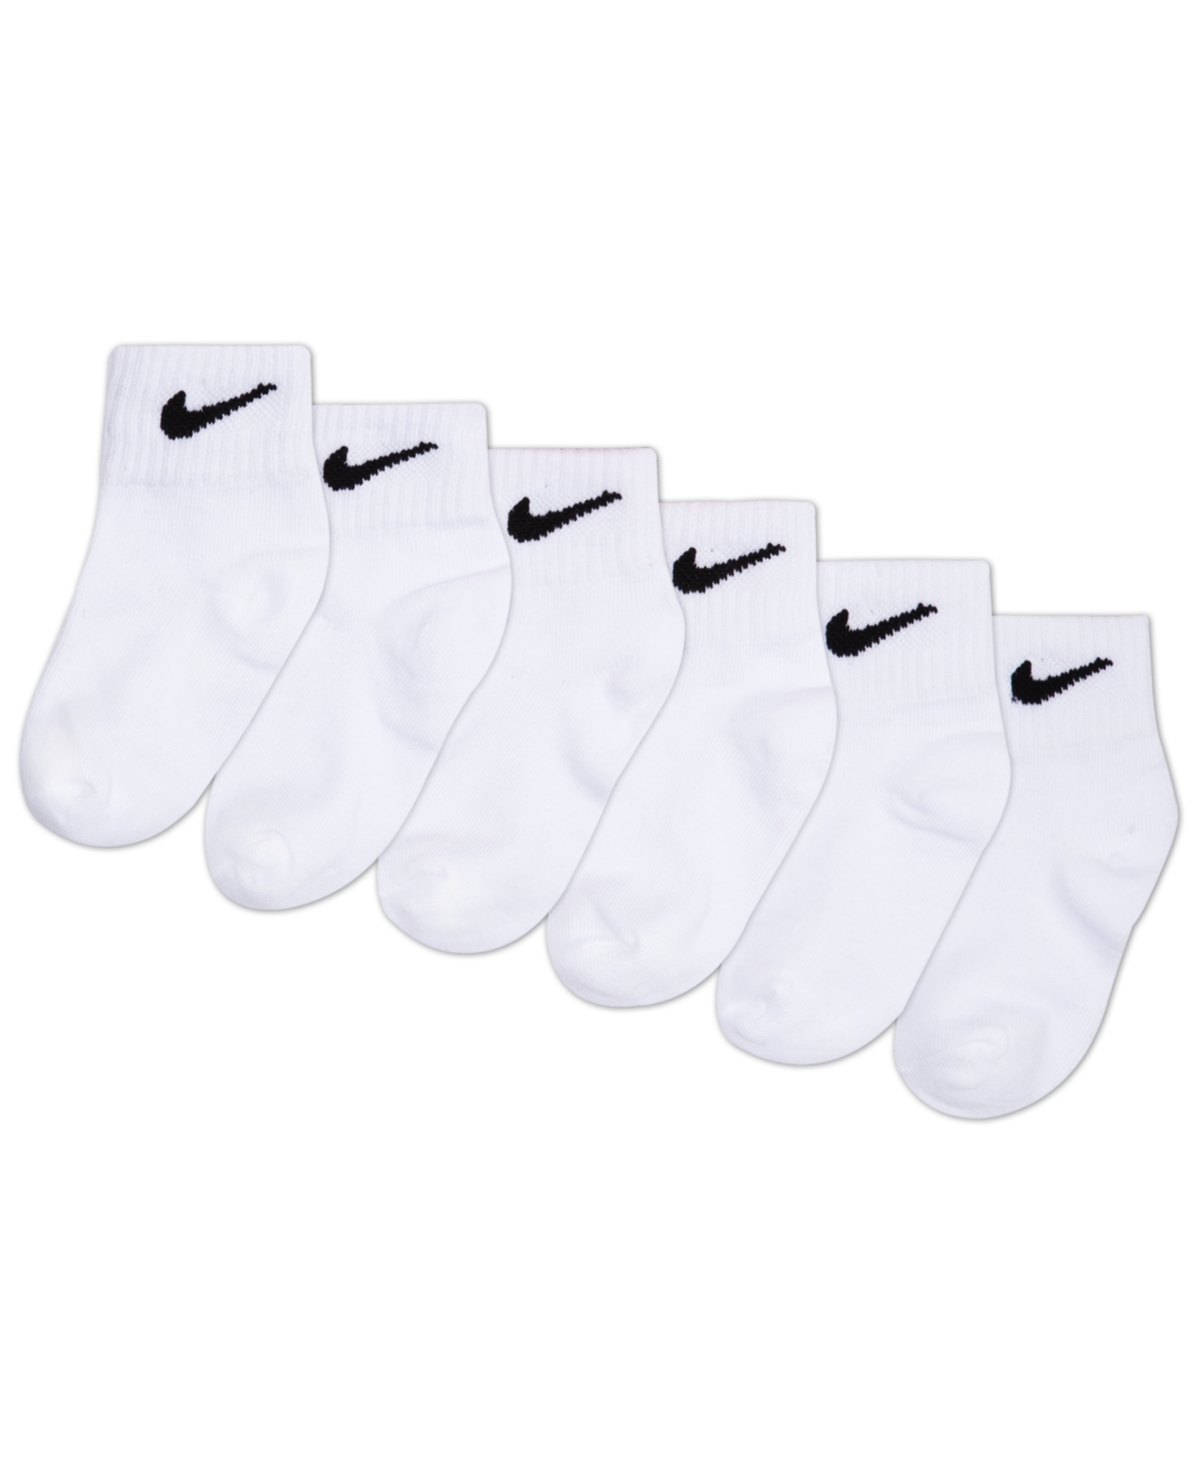 Nike Baby Boys Or Baby Girls Assorted Ankle Socks, Pack Of 6 In White